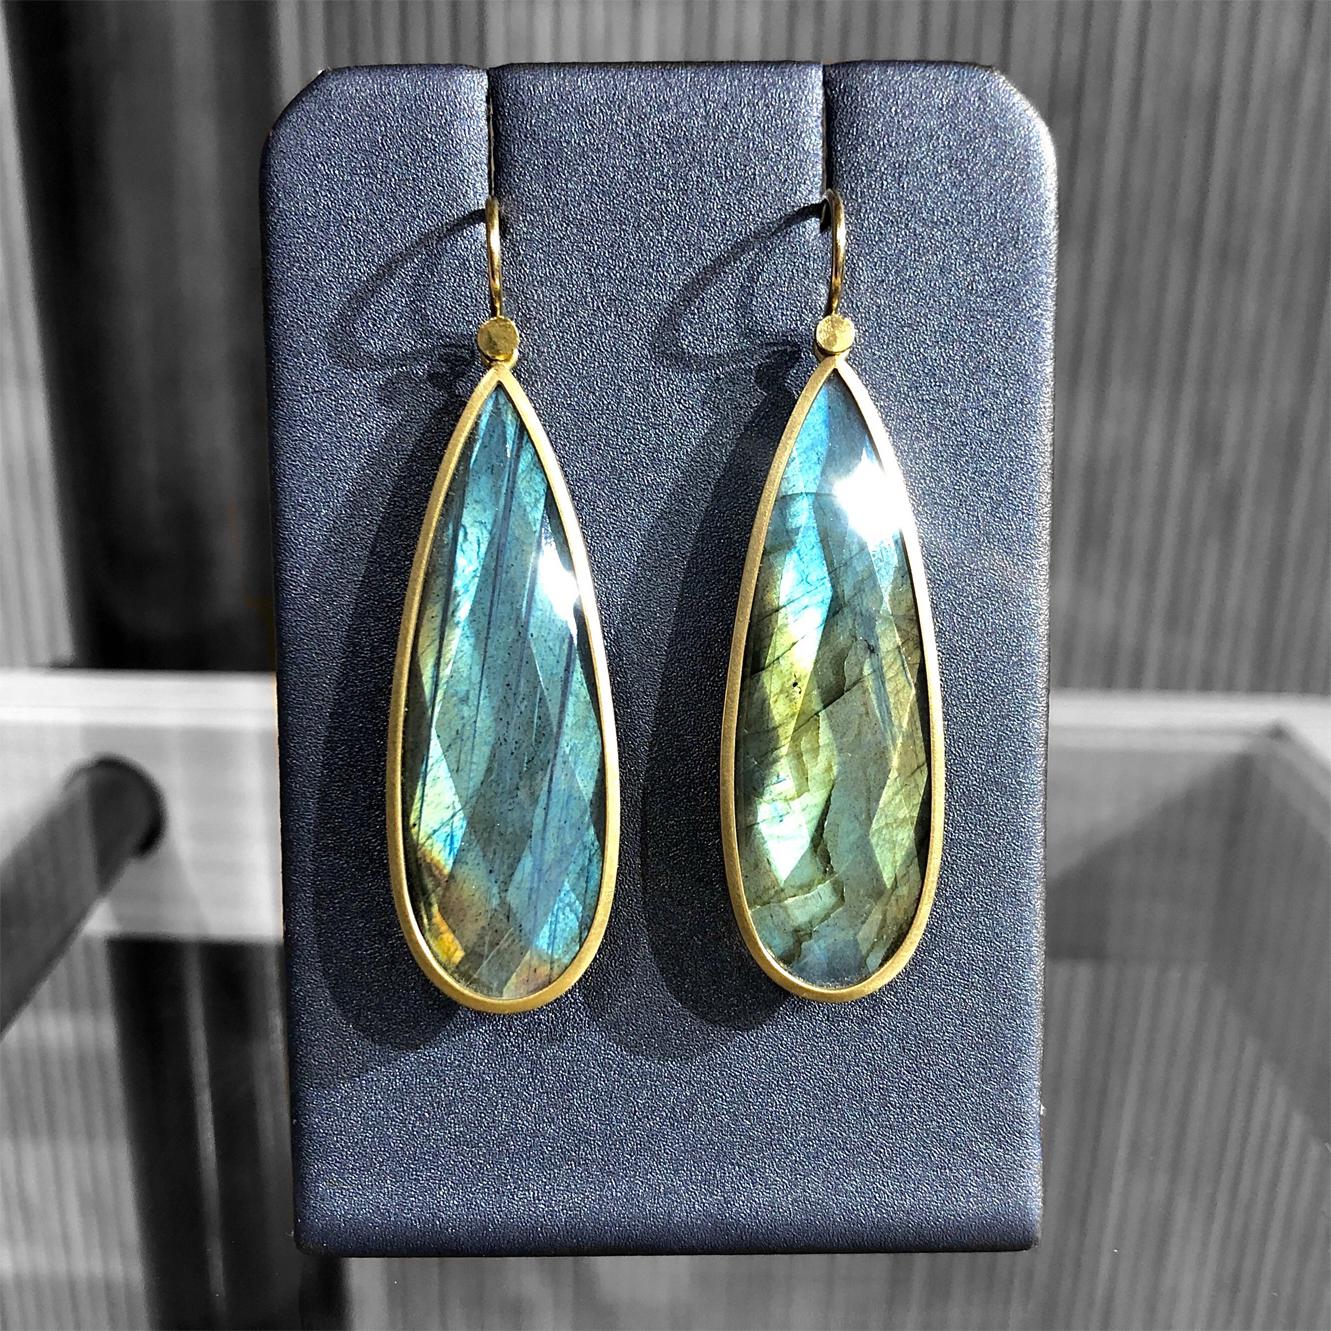 One of a Kind Drop Earrings by jewelry maker Lola Brooks hand-fabricated in matte-finished 18k yellow gold featuring a spectacular matched pair of shimmering, fiery faceted labradorite (43.39tcw), bezel-set and finished on the artist's signature